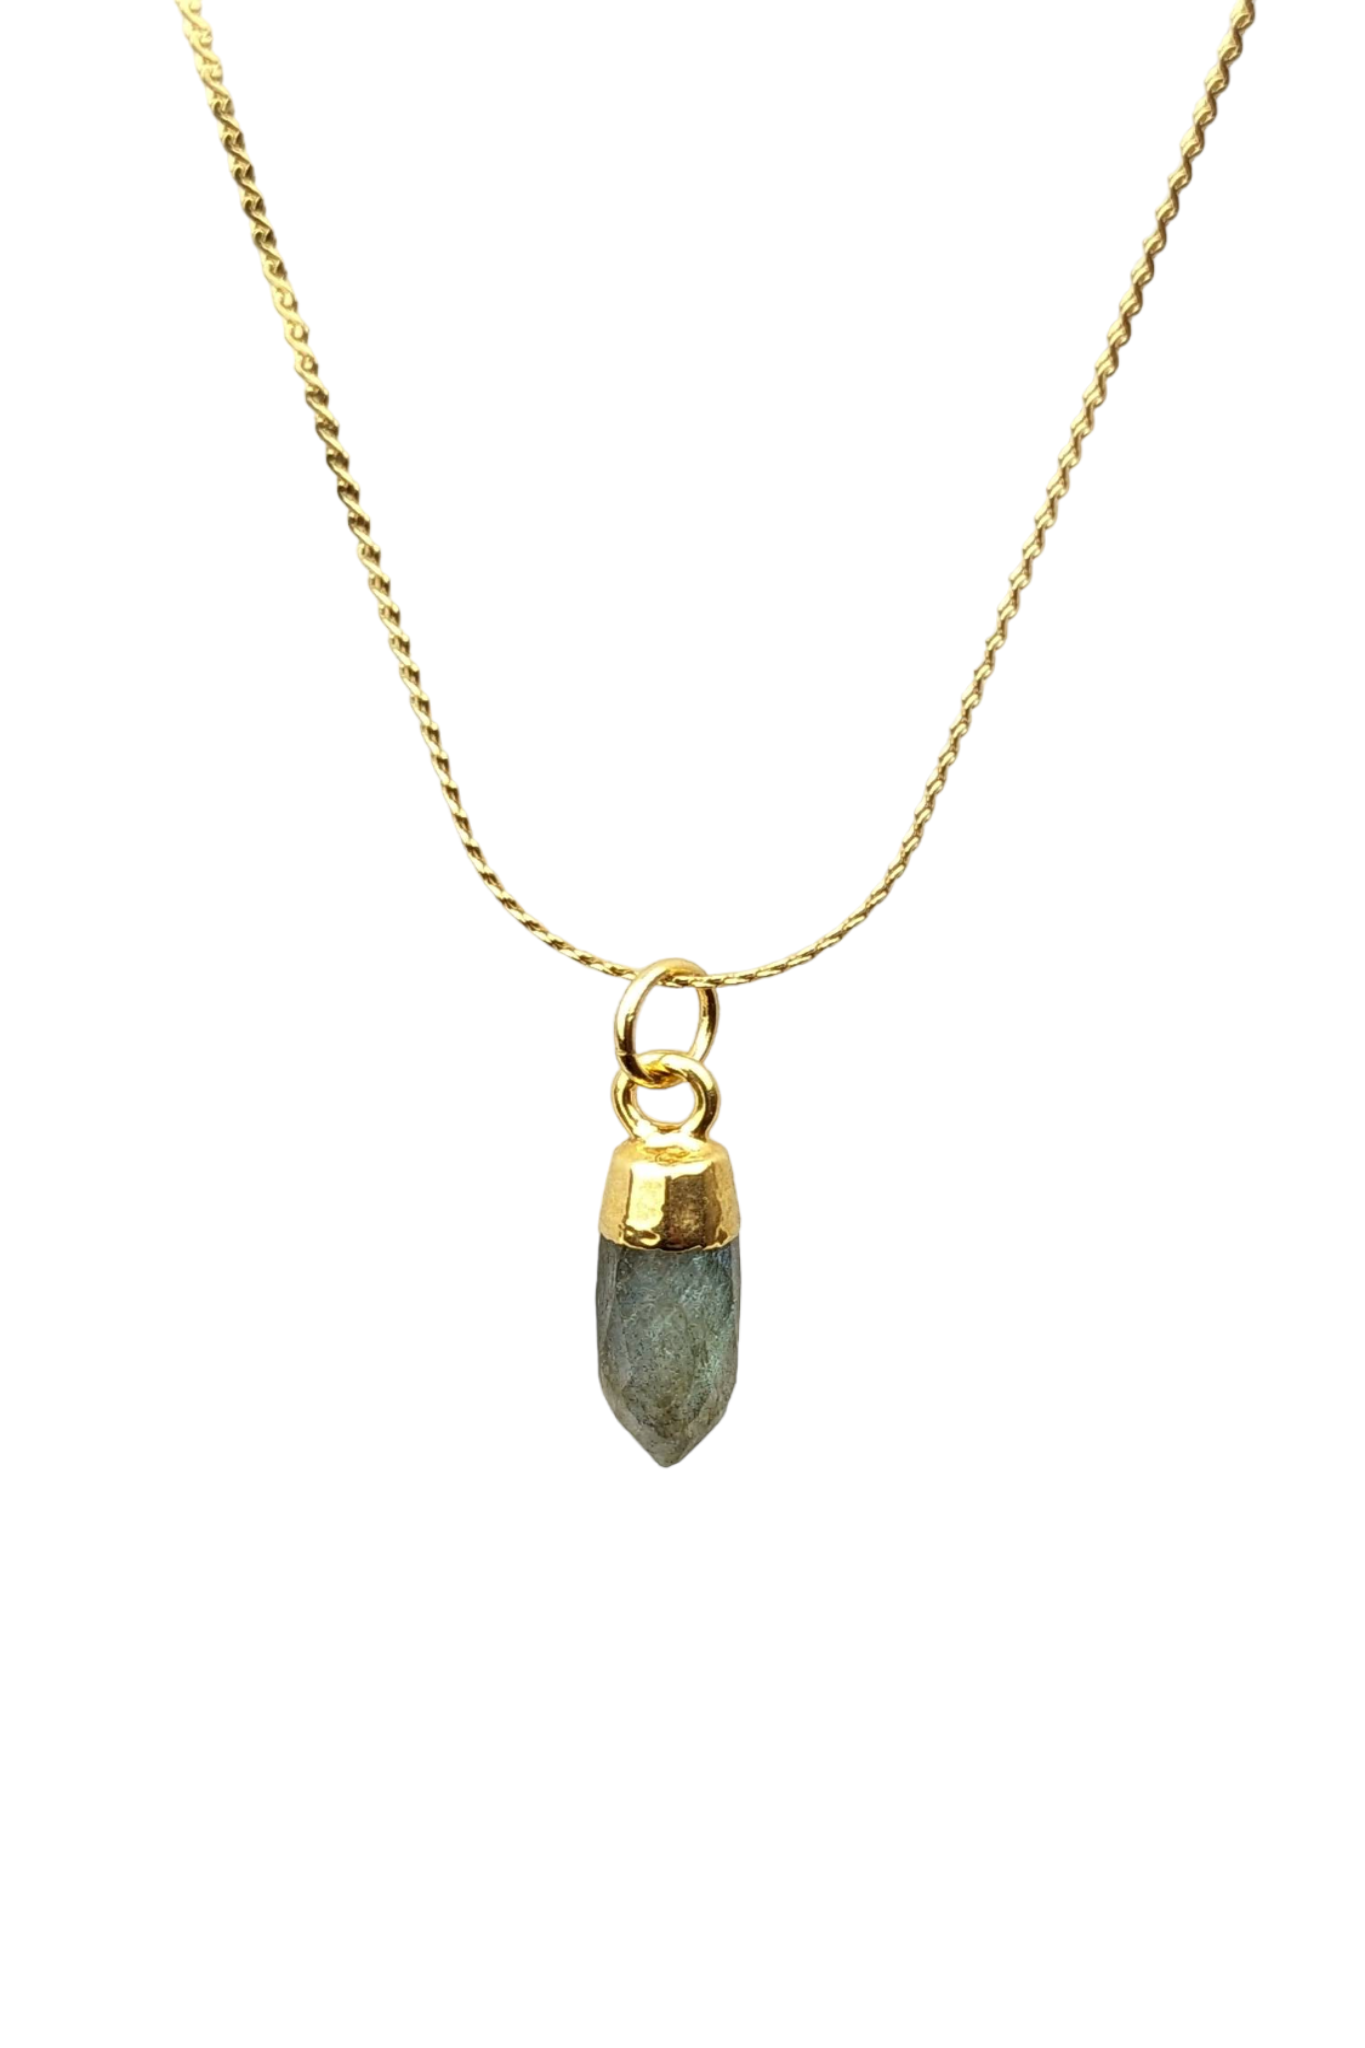 New Opportunities - Find your Path - Crown Chakra stay gold by mme bovary necklace pendant